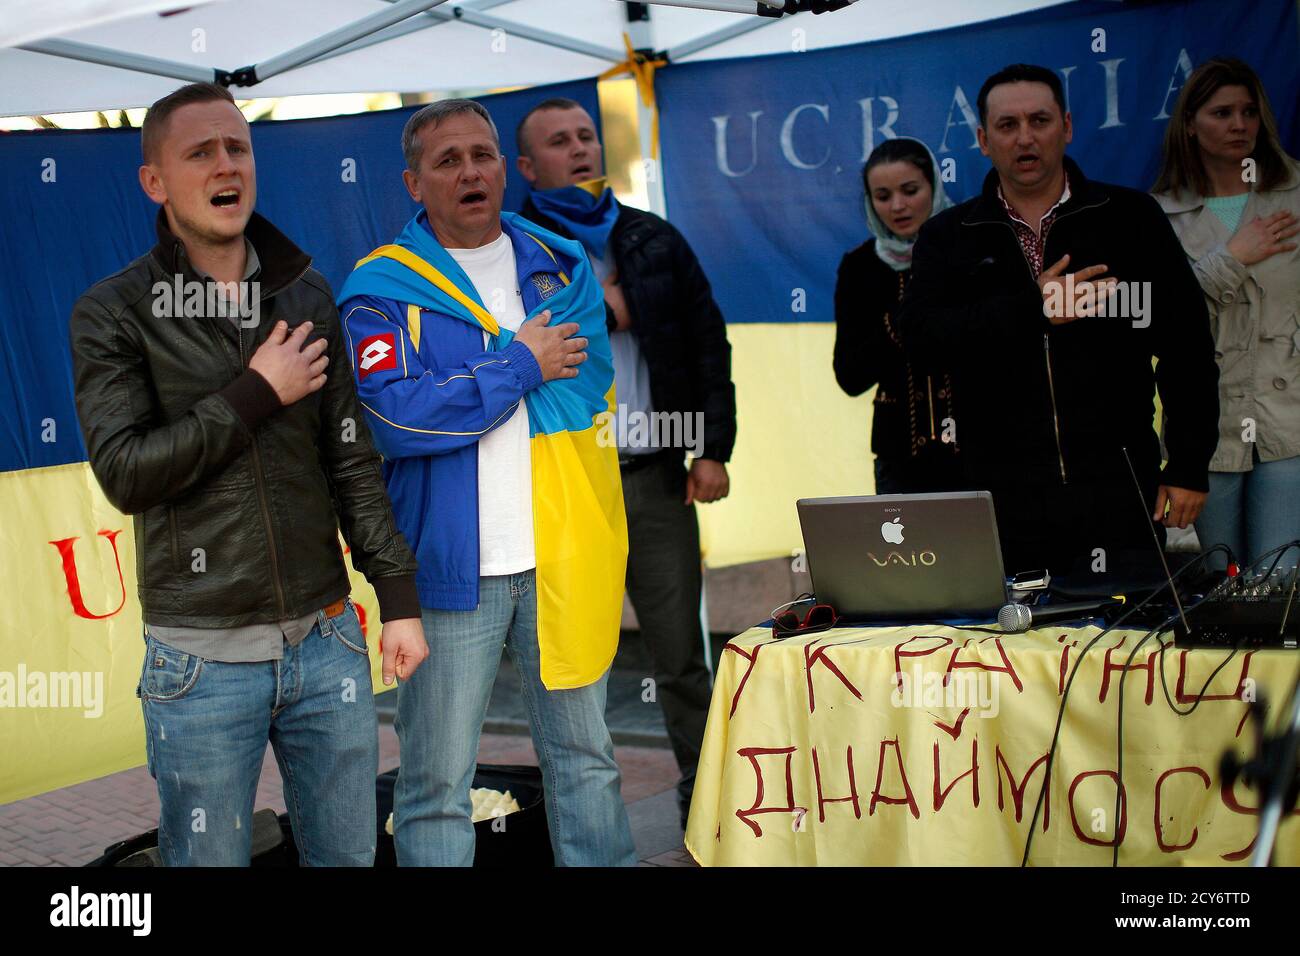 Ukrainians living in Malaga sing the Ukrainian anthem during a protest against Russian President Vladimir Putin and in favor of unity and democratic freedom in Ukraine, in downtown Malaga, southern Spain, March 16, 2014. France on Sunday demanded Russia immediately take measures to reduce 'pointless and dangerous' tensions in Ukraine, calling the secession referendum held in the Crimea region illegal. The words on the Ukrainian flag (bottom R) reads, 'Ukrainians united'. REUTERS/Jon Nazca (SPAIN - Tags: POLITICS CIVIL UNREST ELECTIONS) Stock Photo